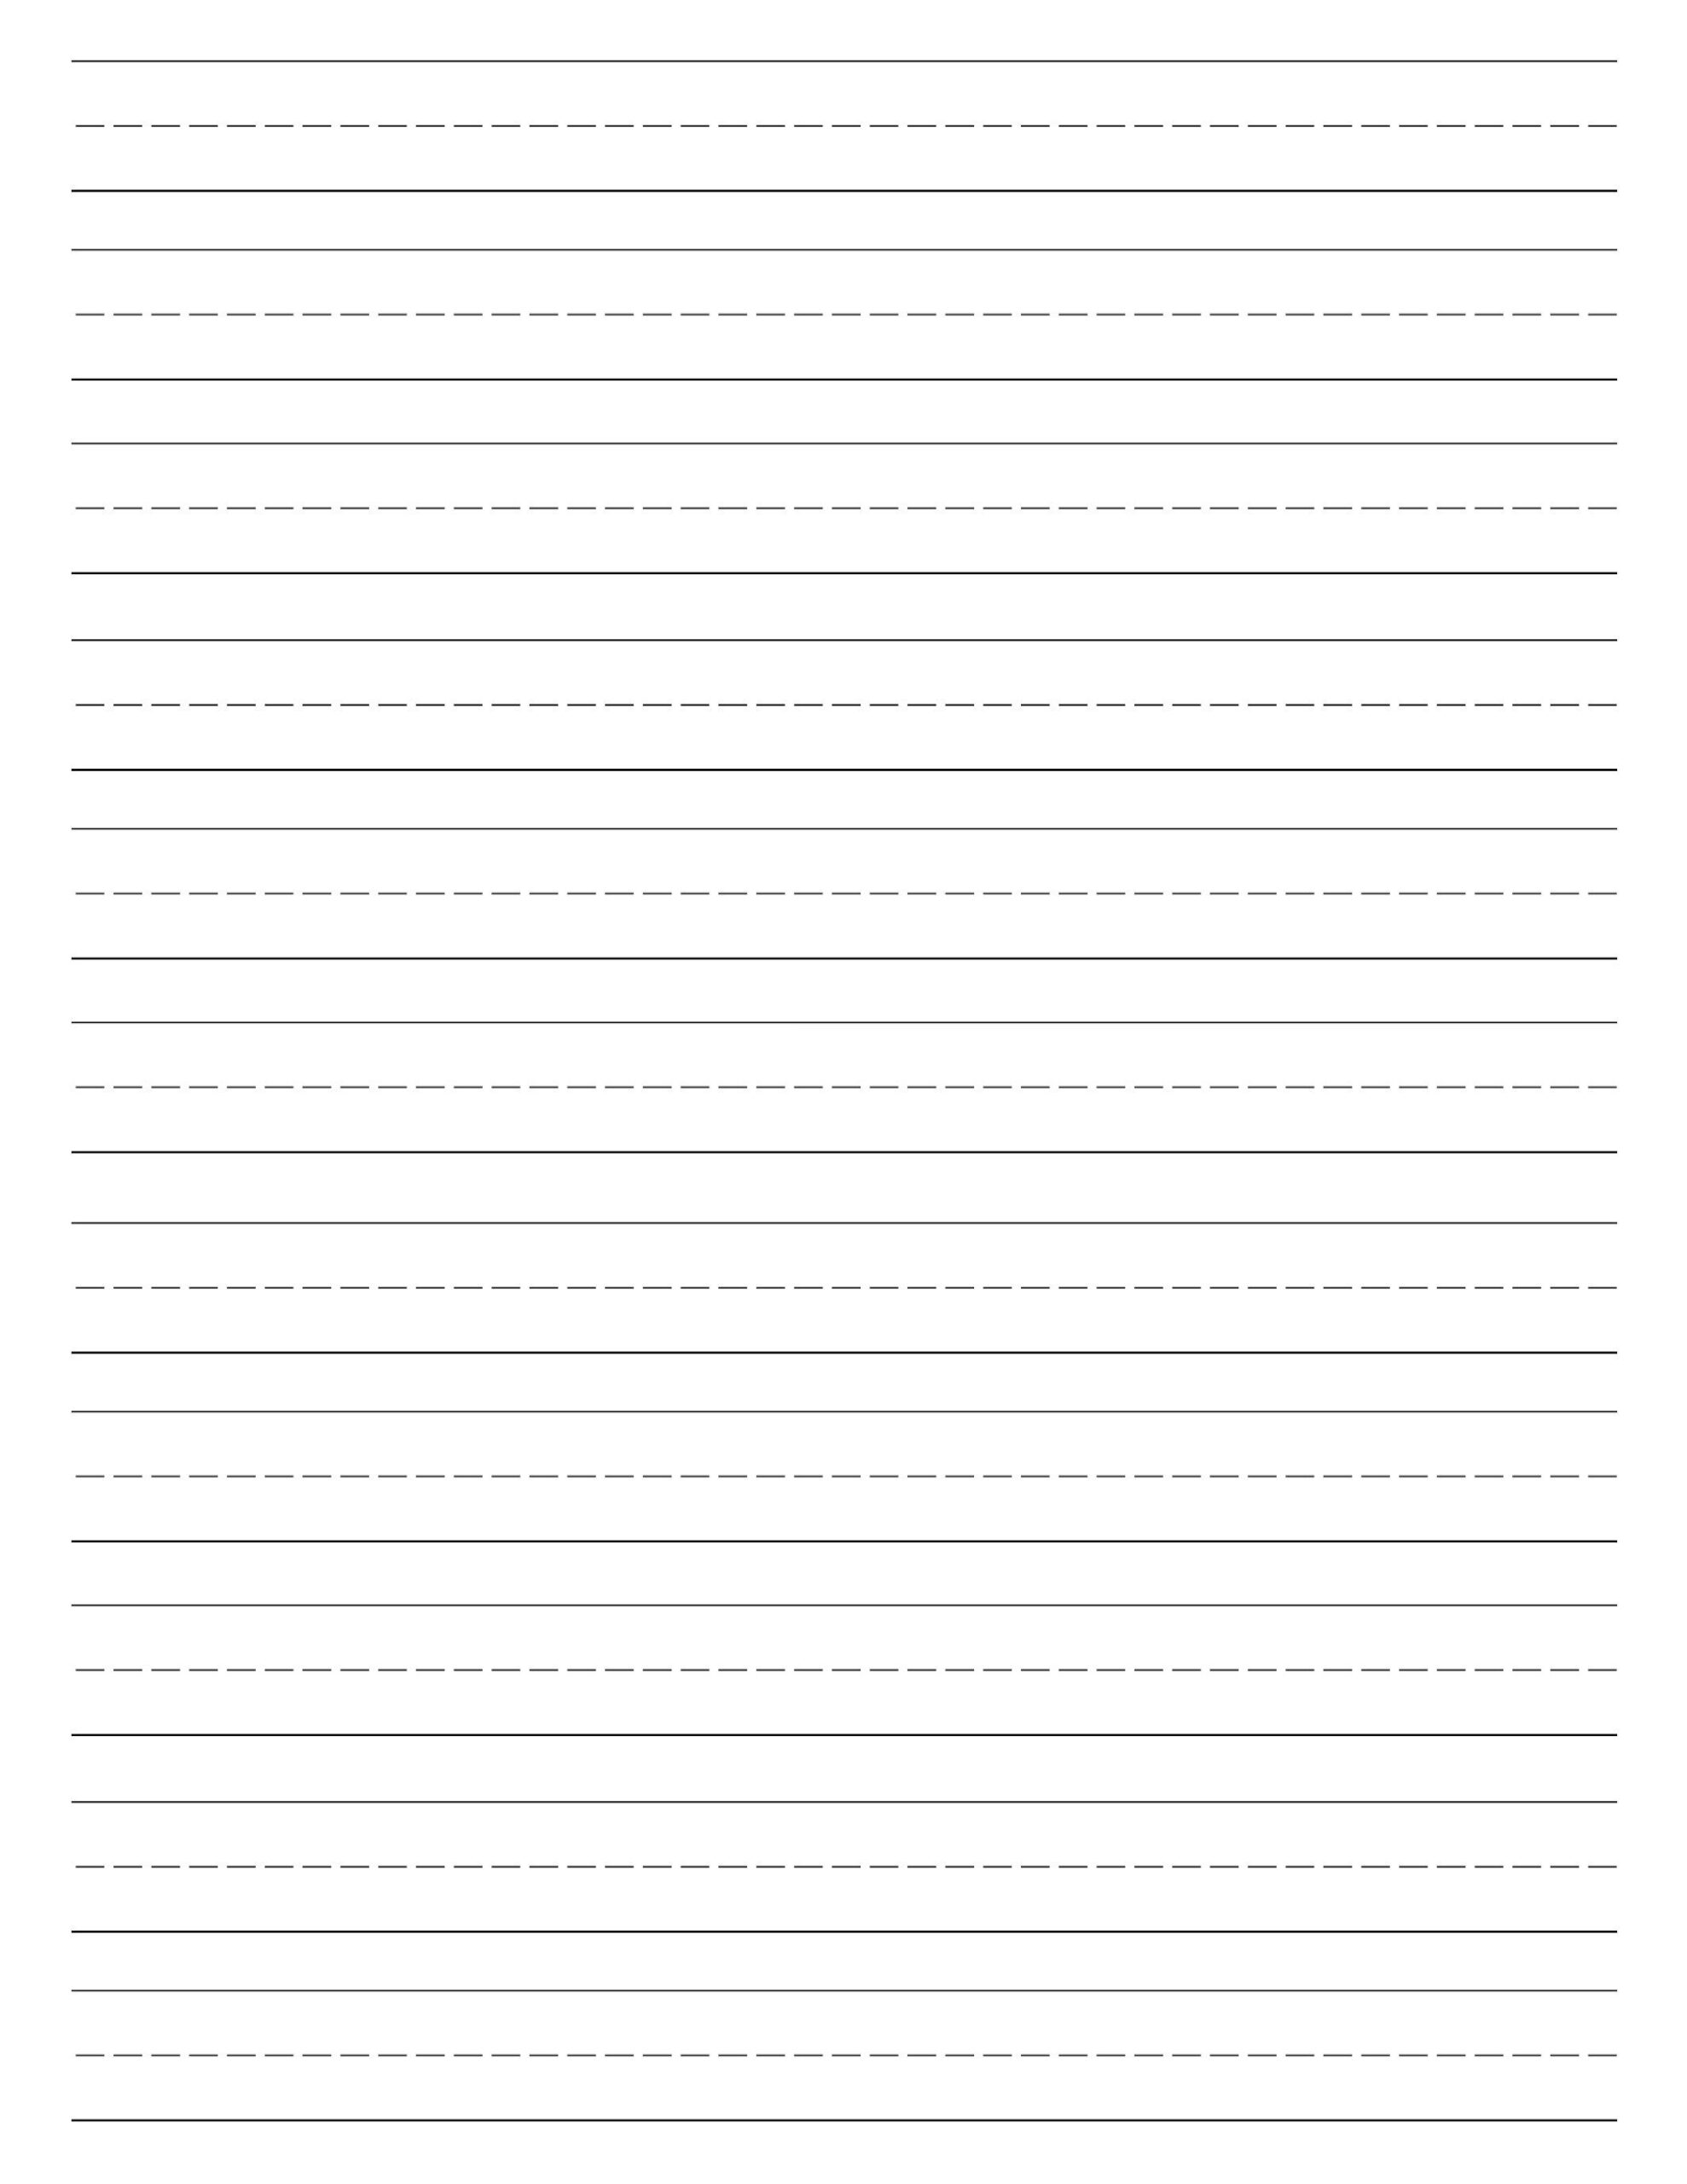 Lined Paper For Learning To Write